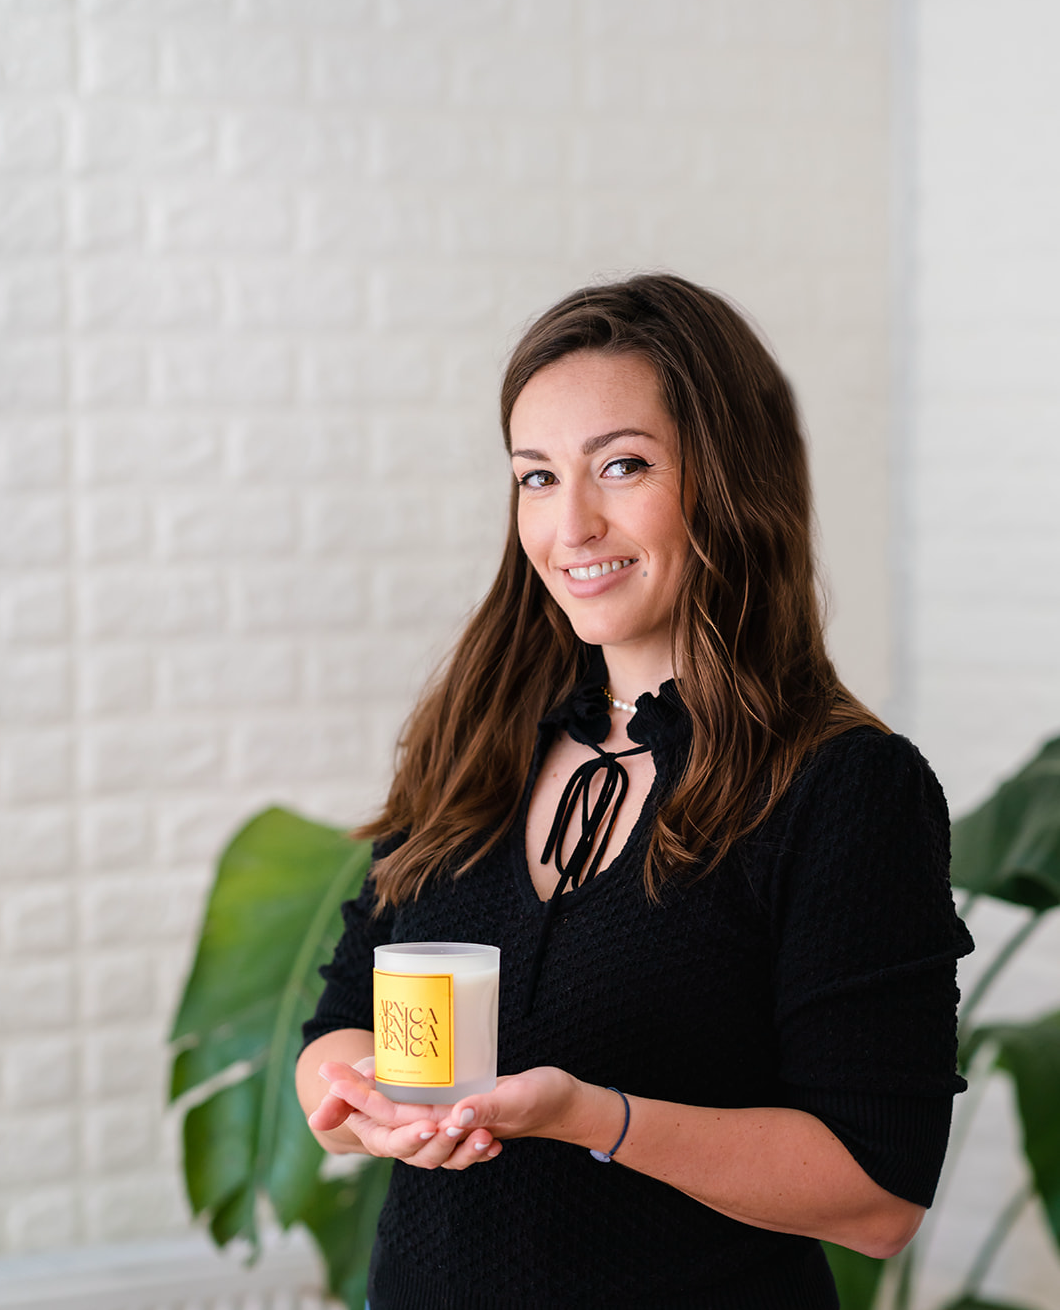 Arnica Candle: The Story Behind The Scene